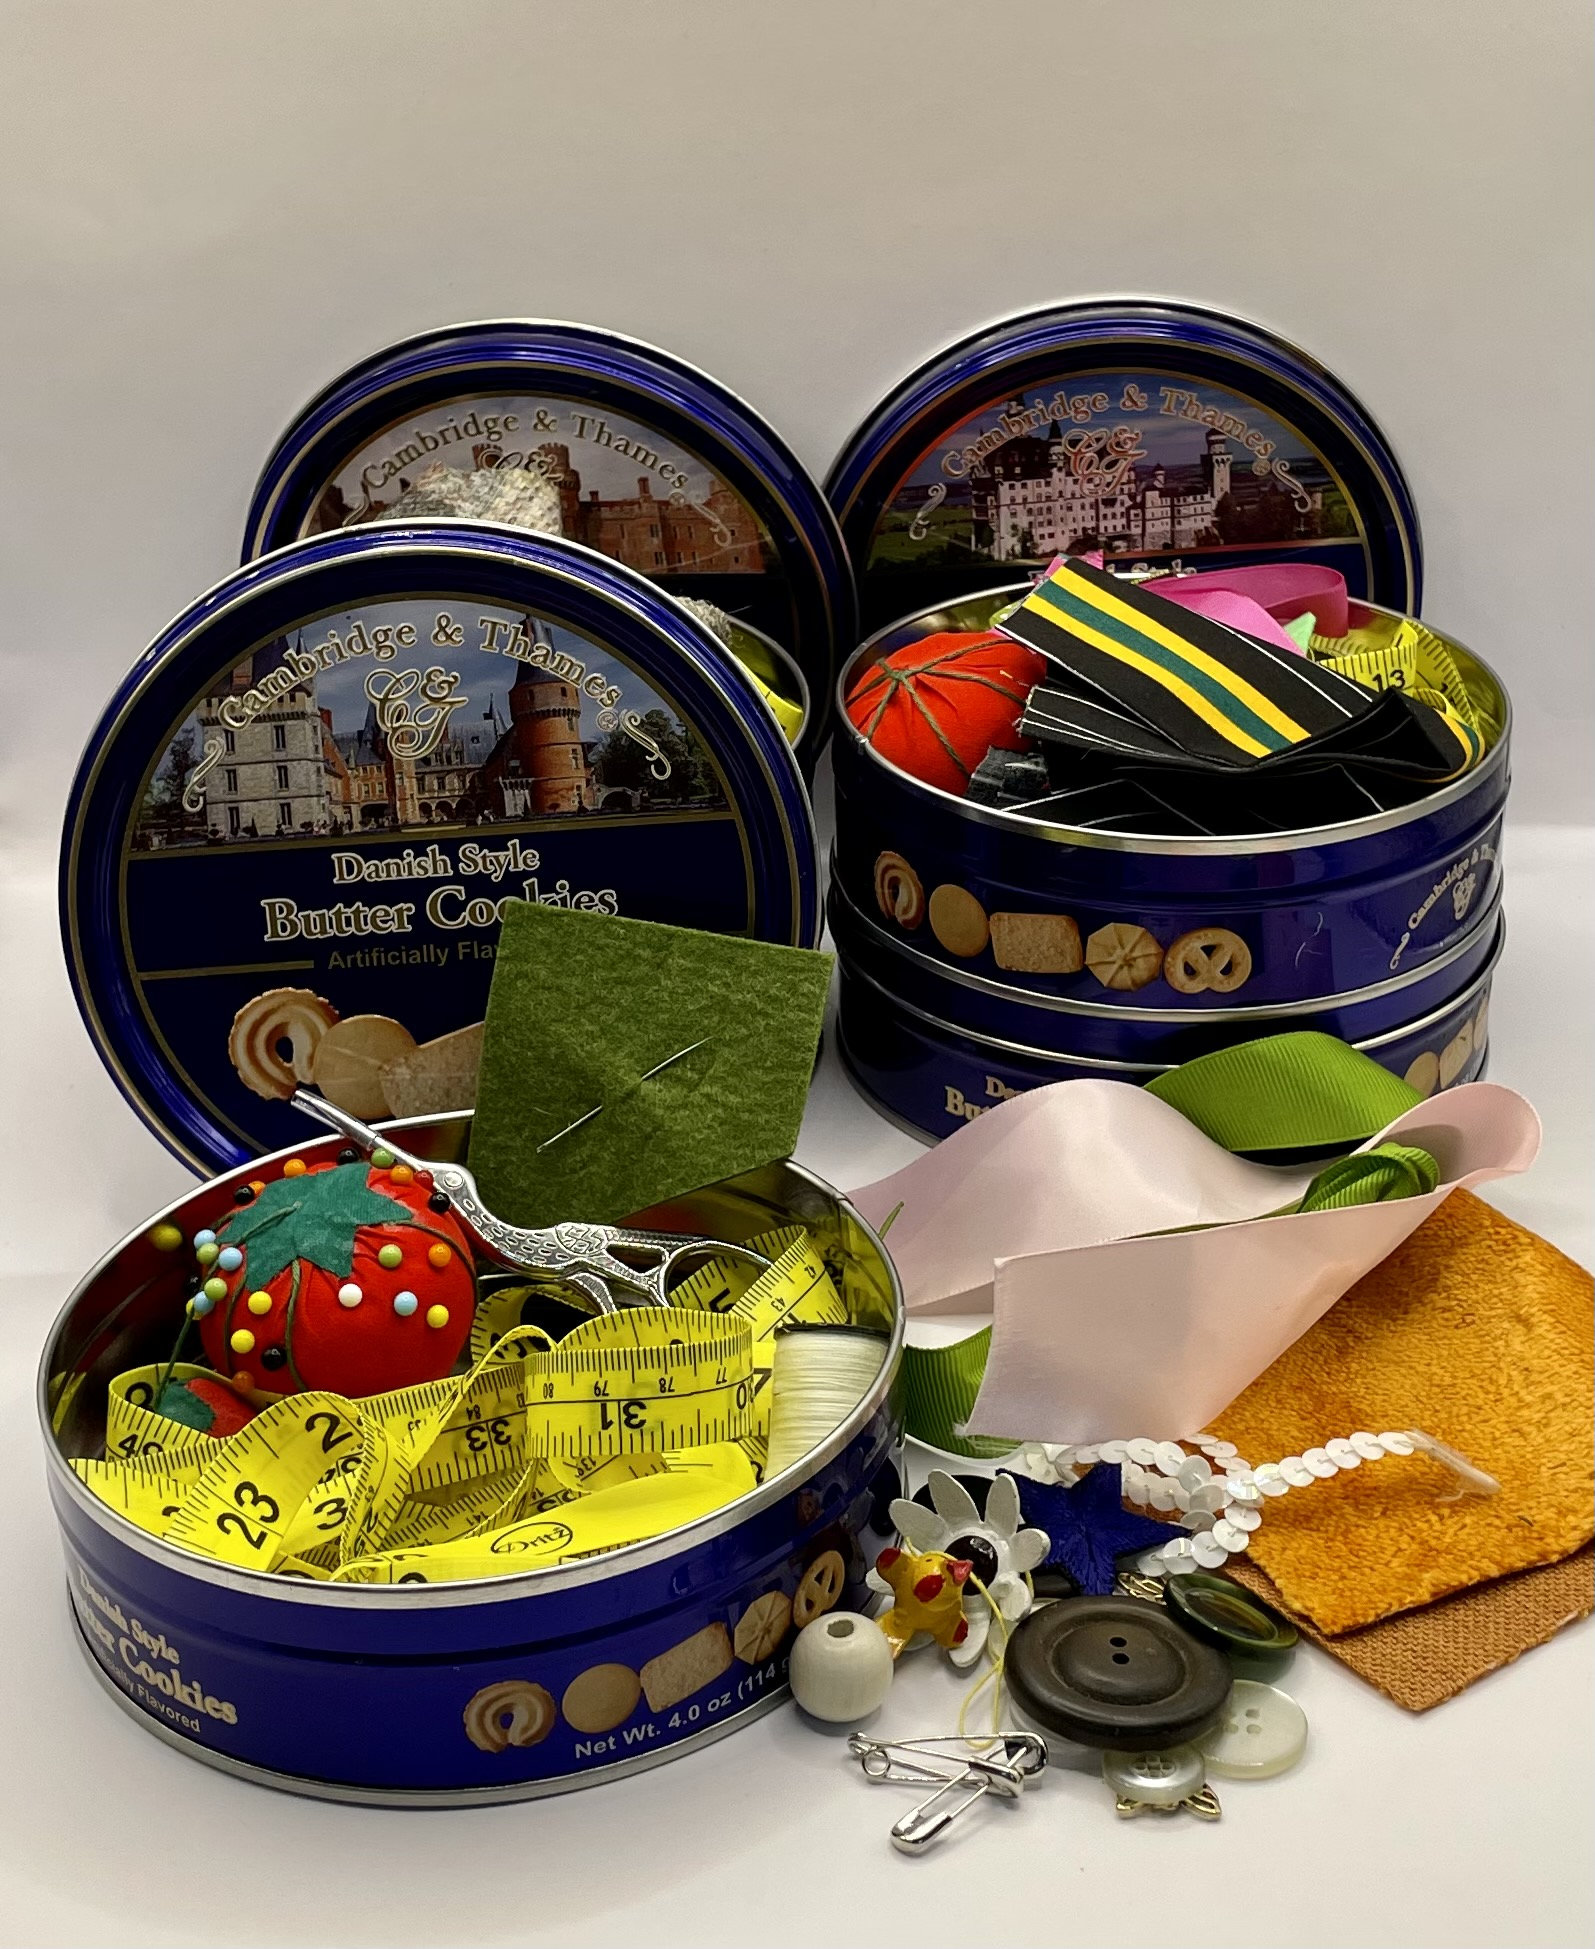  Coquimbo Sewing Kit Gifts for Grandma, Mom, Friend, Adults  Beginner Kids Traveler, Portable Sewing Supplies Accessories with Case  Contains Thread, Needle, Scissors, Measure Tape, Thimble etc(Black, M)